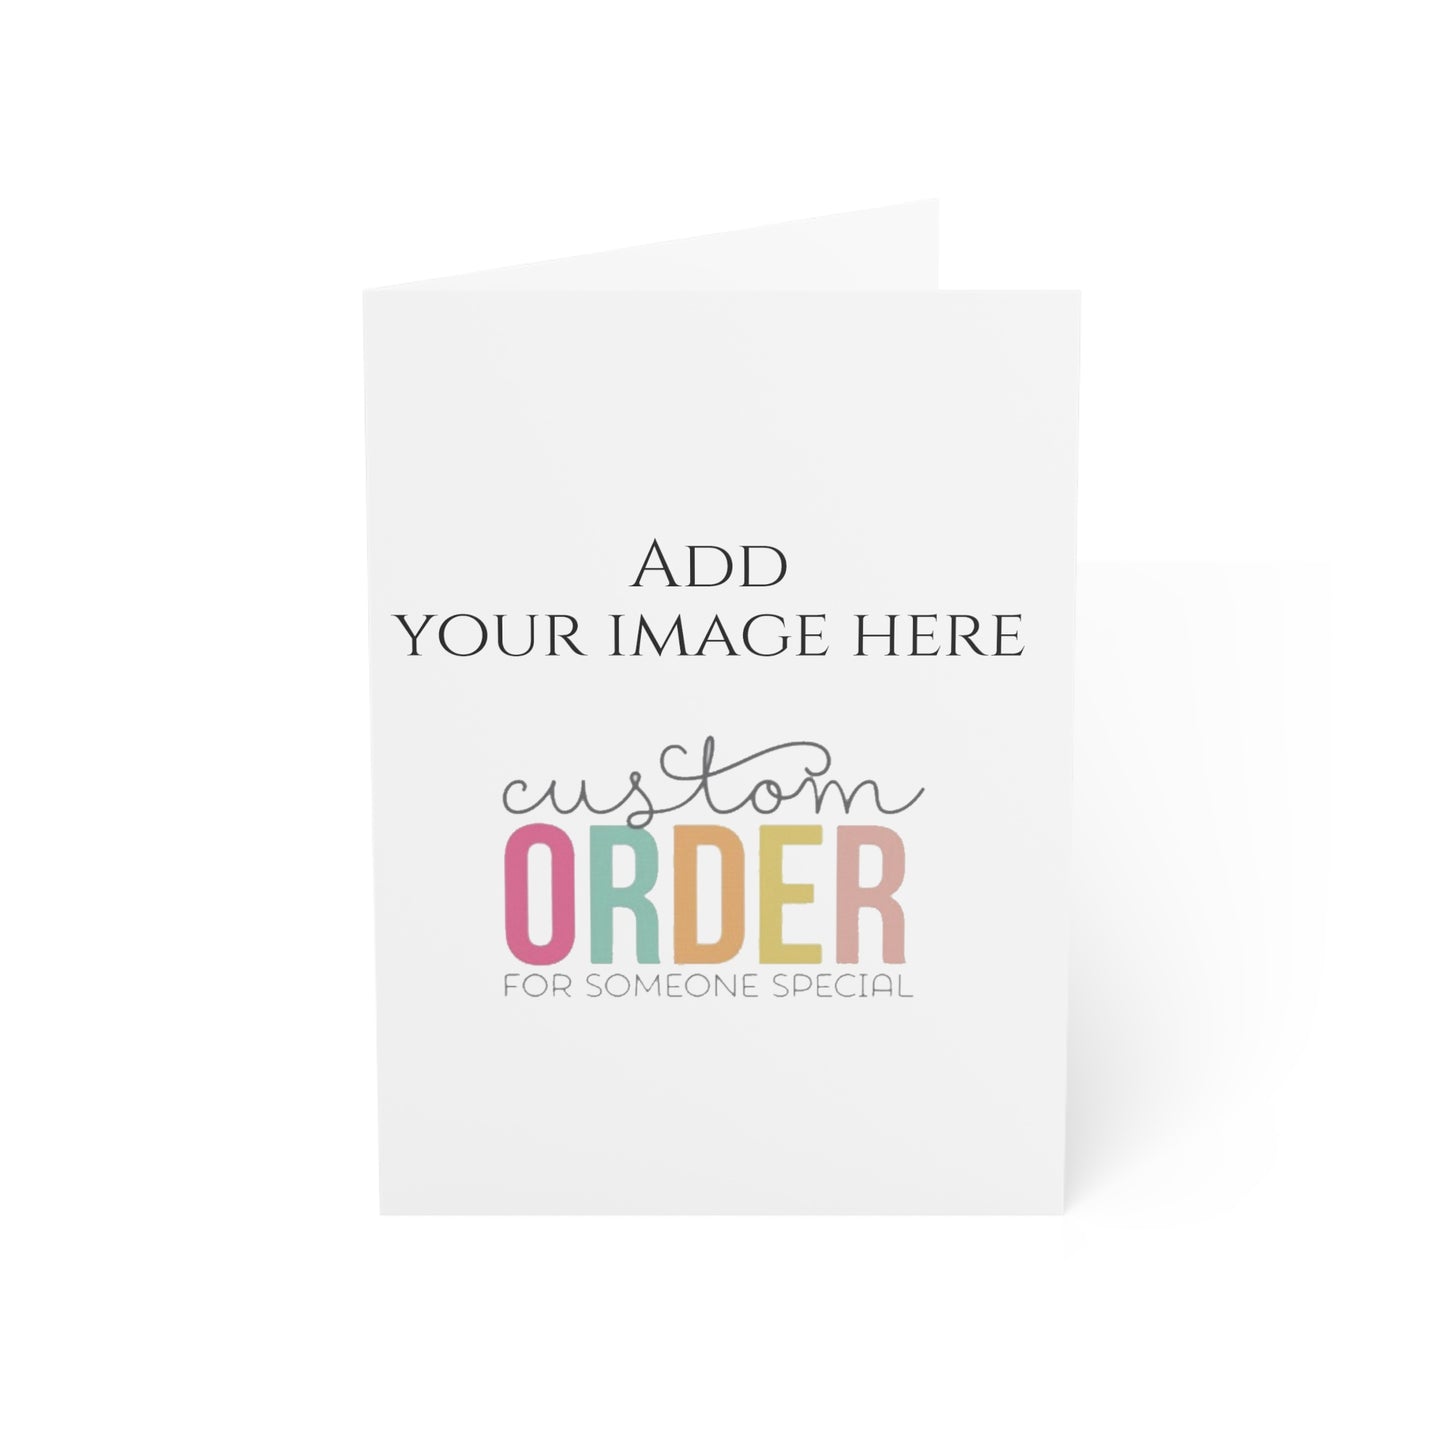 Customizable Greeting Cards - Folded Greeting Cards (1, 10, 30, and 50pcs)